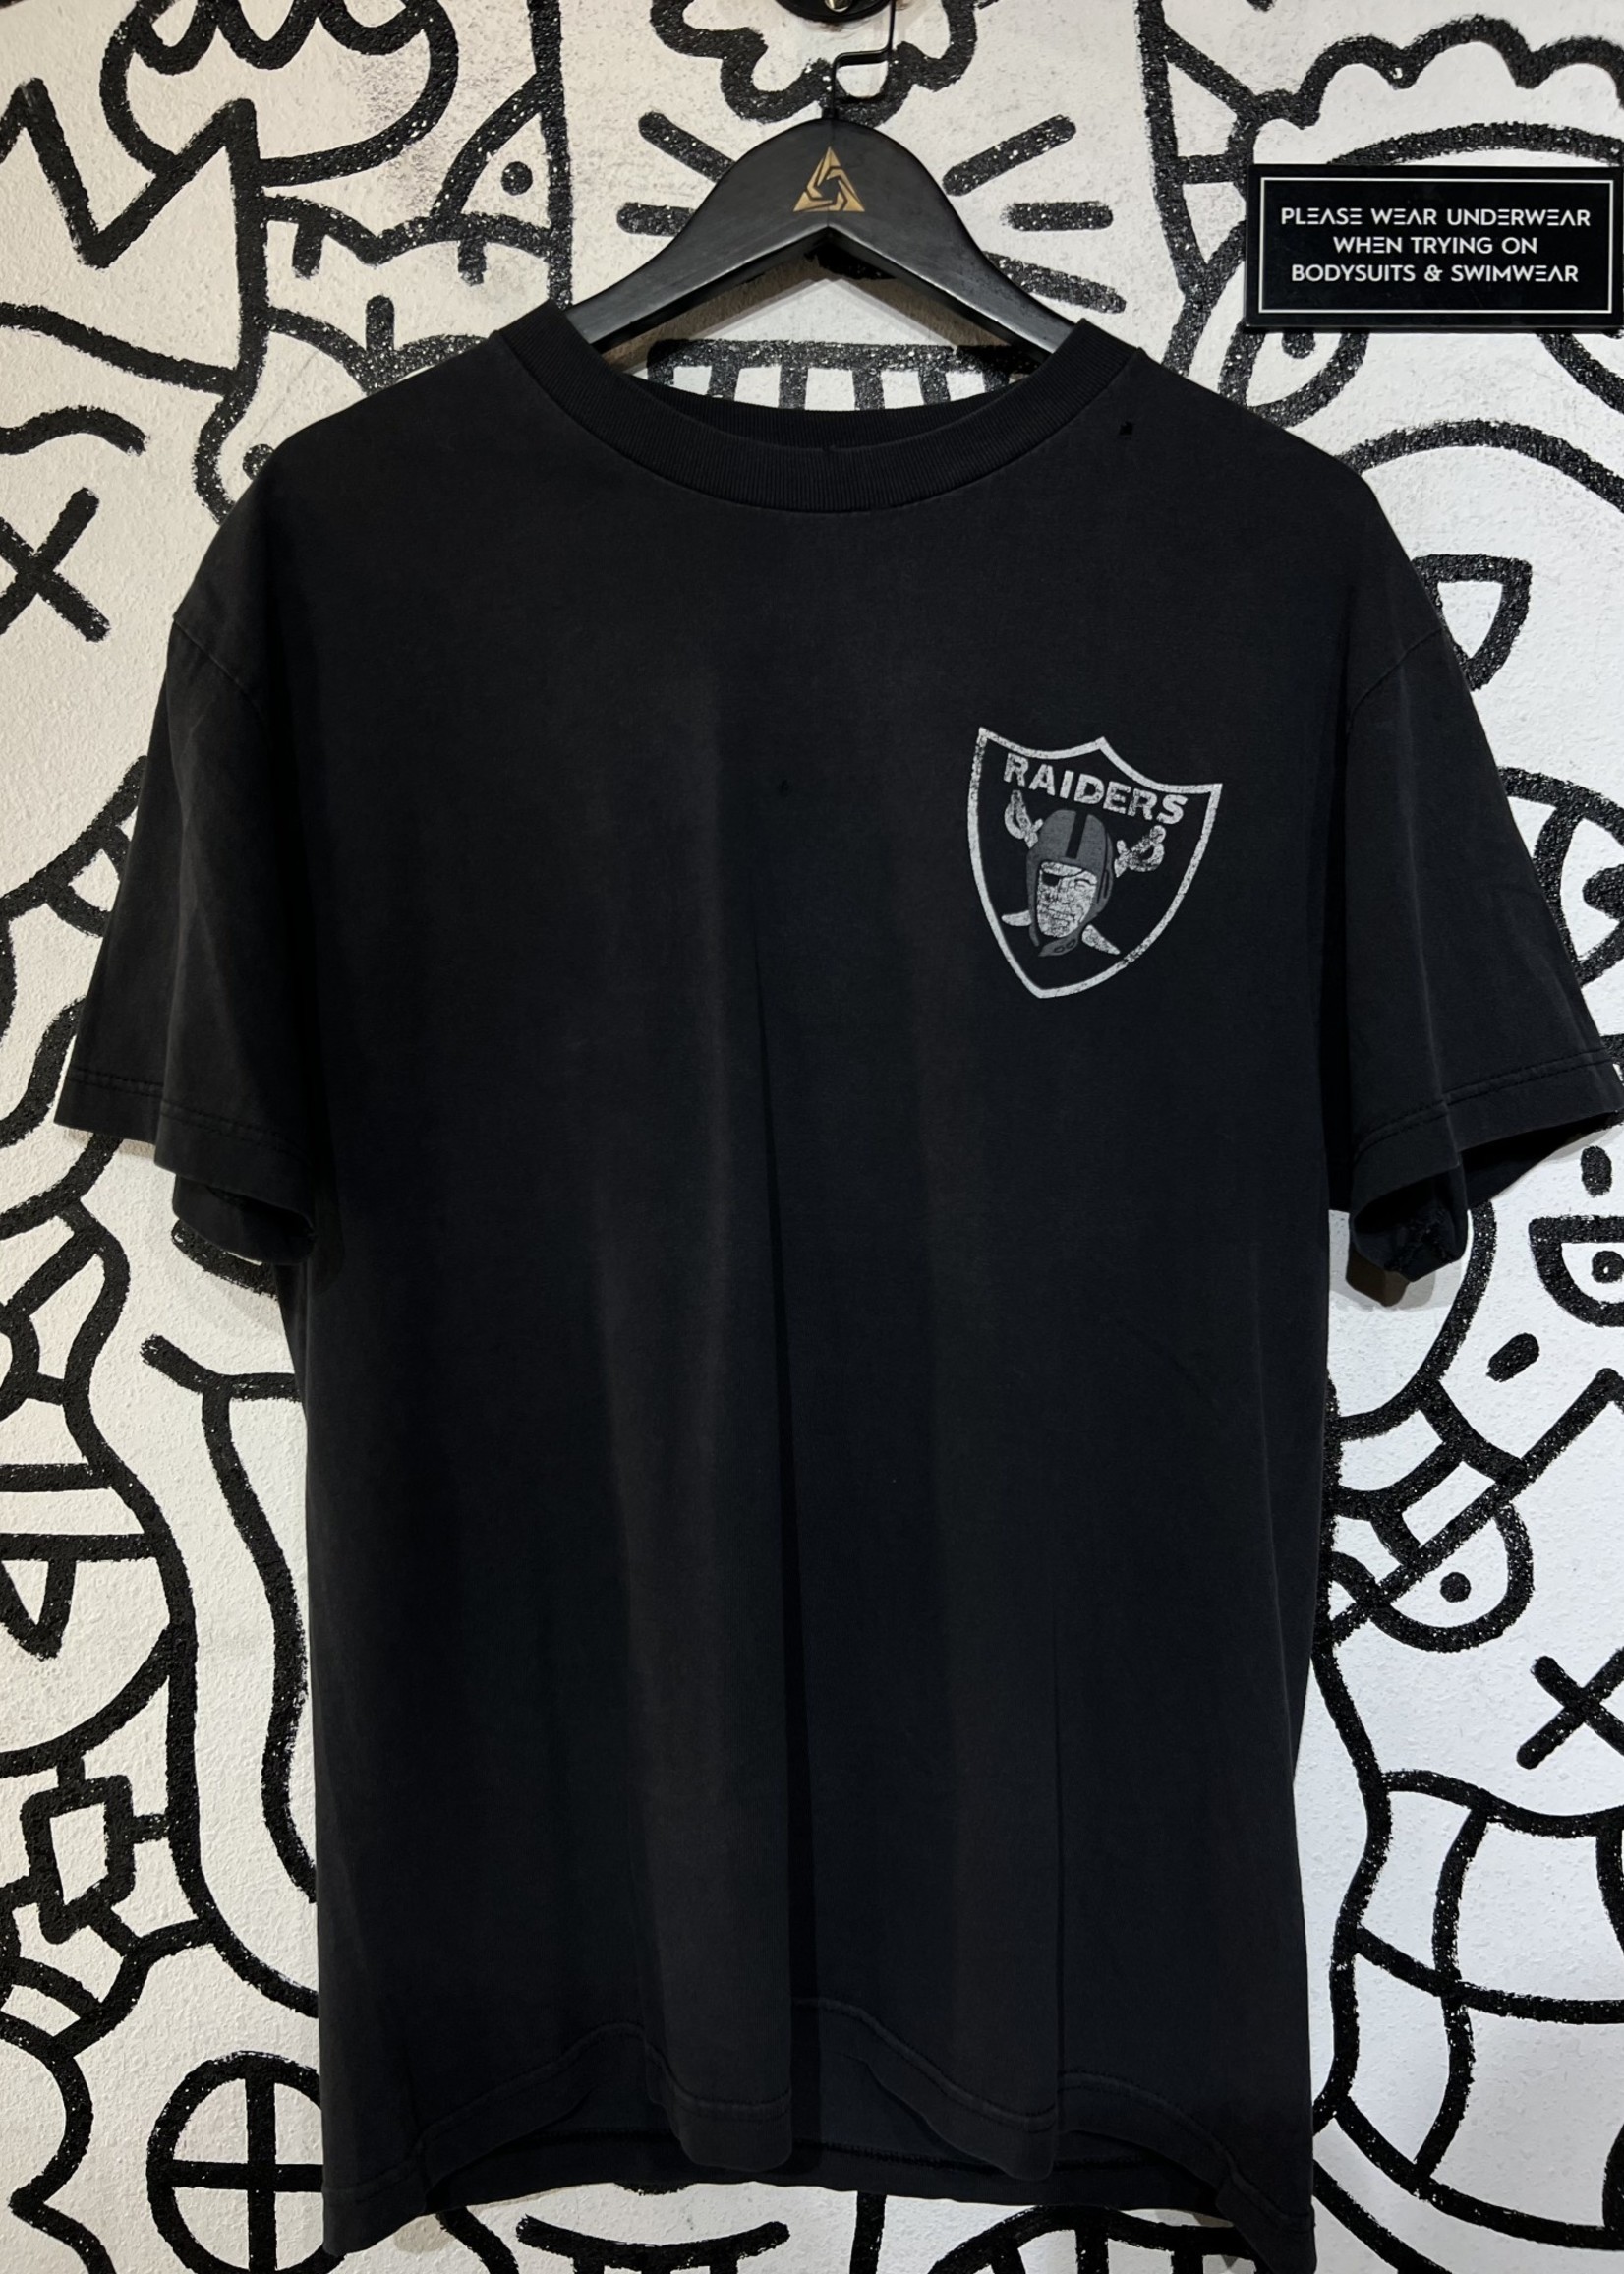 Raiders Breaking Out The Black Hole Tee L